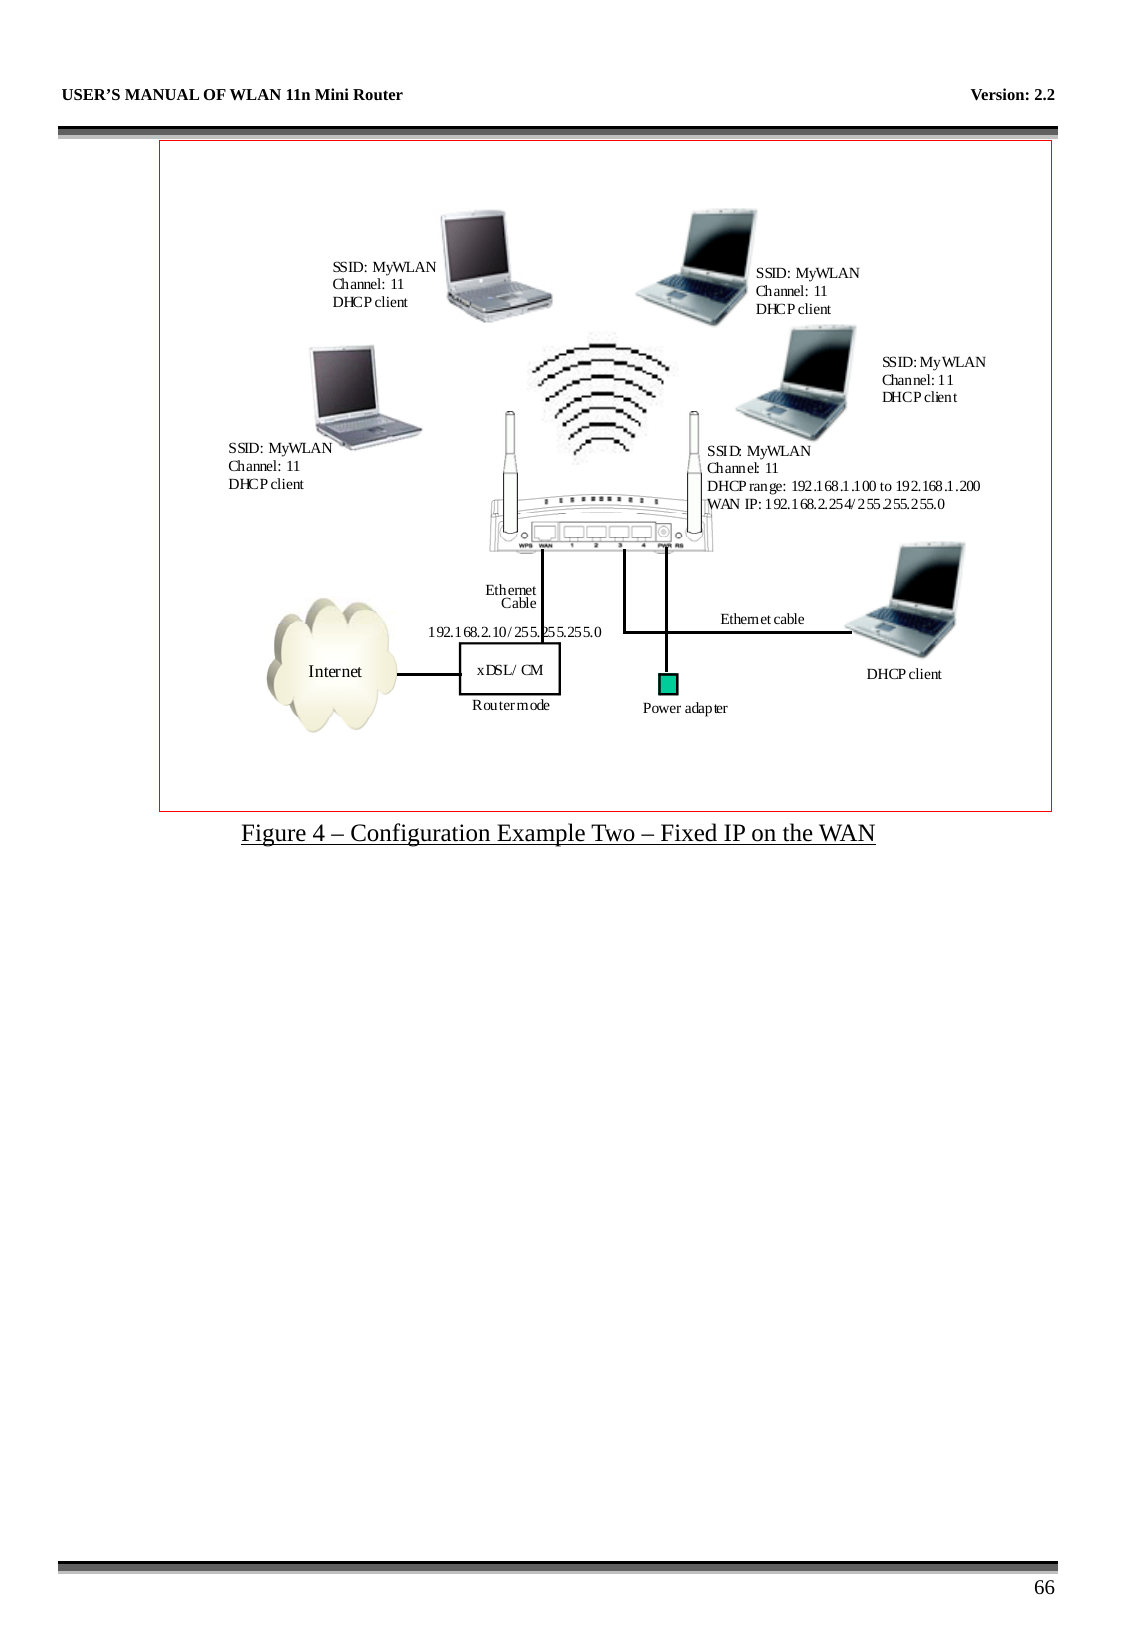   USER’S MANUAL OF WLAN 11n Mini Router    Version: 2.2      66 Internet xDSL/ CMPower adapterEthernetCable Ethern et cableSS ID :  M y WLA NChannel: 11 DHC P clien tSSID: MyWLANChannel: 11 DHCP clientSSID: MyWLANChannel: 11 DHCP clientSSID: MyWLANChannel: 11 DHCP clientDHCP clientR ou ter m odeSSID: MyWLANCh annel: 11DHCP range: 192.168.1.100 to 192.168.1.200WAN IP: 1 92.168.2.254/ 255.255.2 55.01 92.1 68.2.10 / 25 5. 25 5.25 5. 0 Figure 4 – Configuration Example Two – Fixed IP on the WAN  